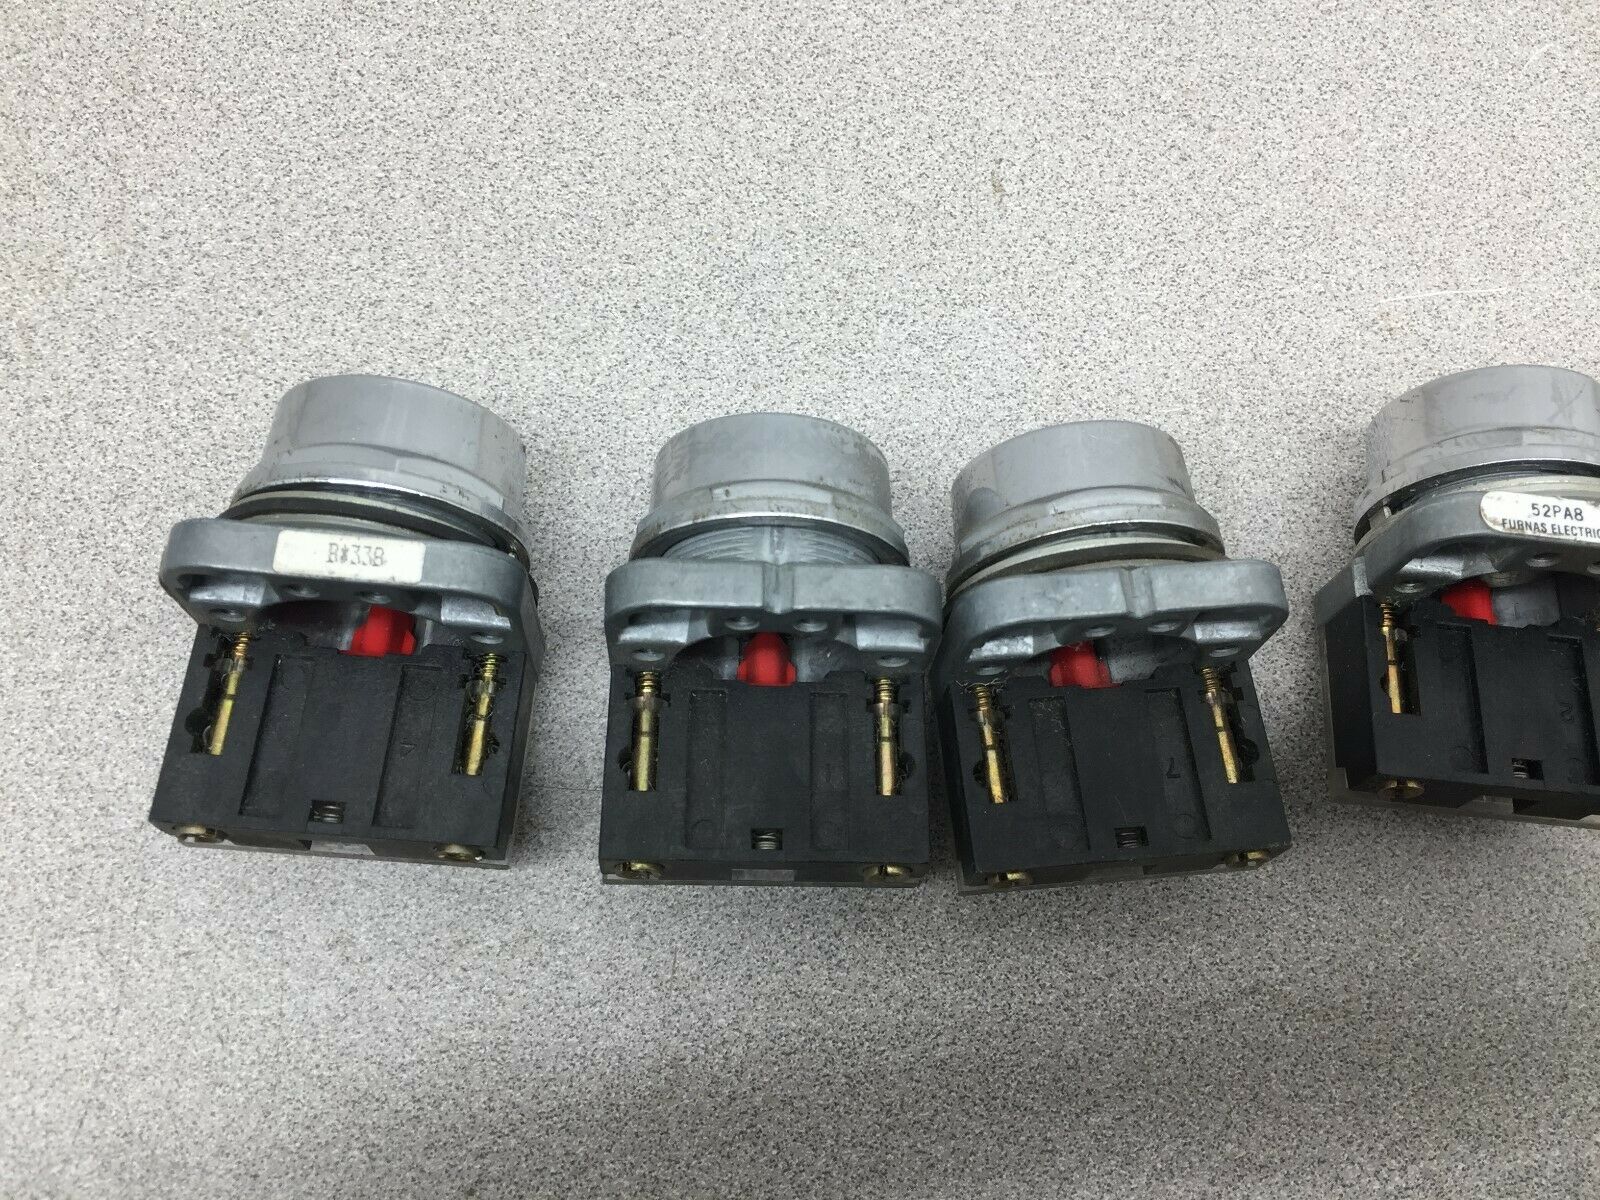 USED LOT OF 4 FURNAS PUSHBUTTON  52PA8